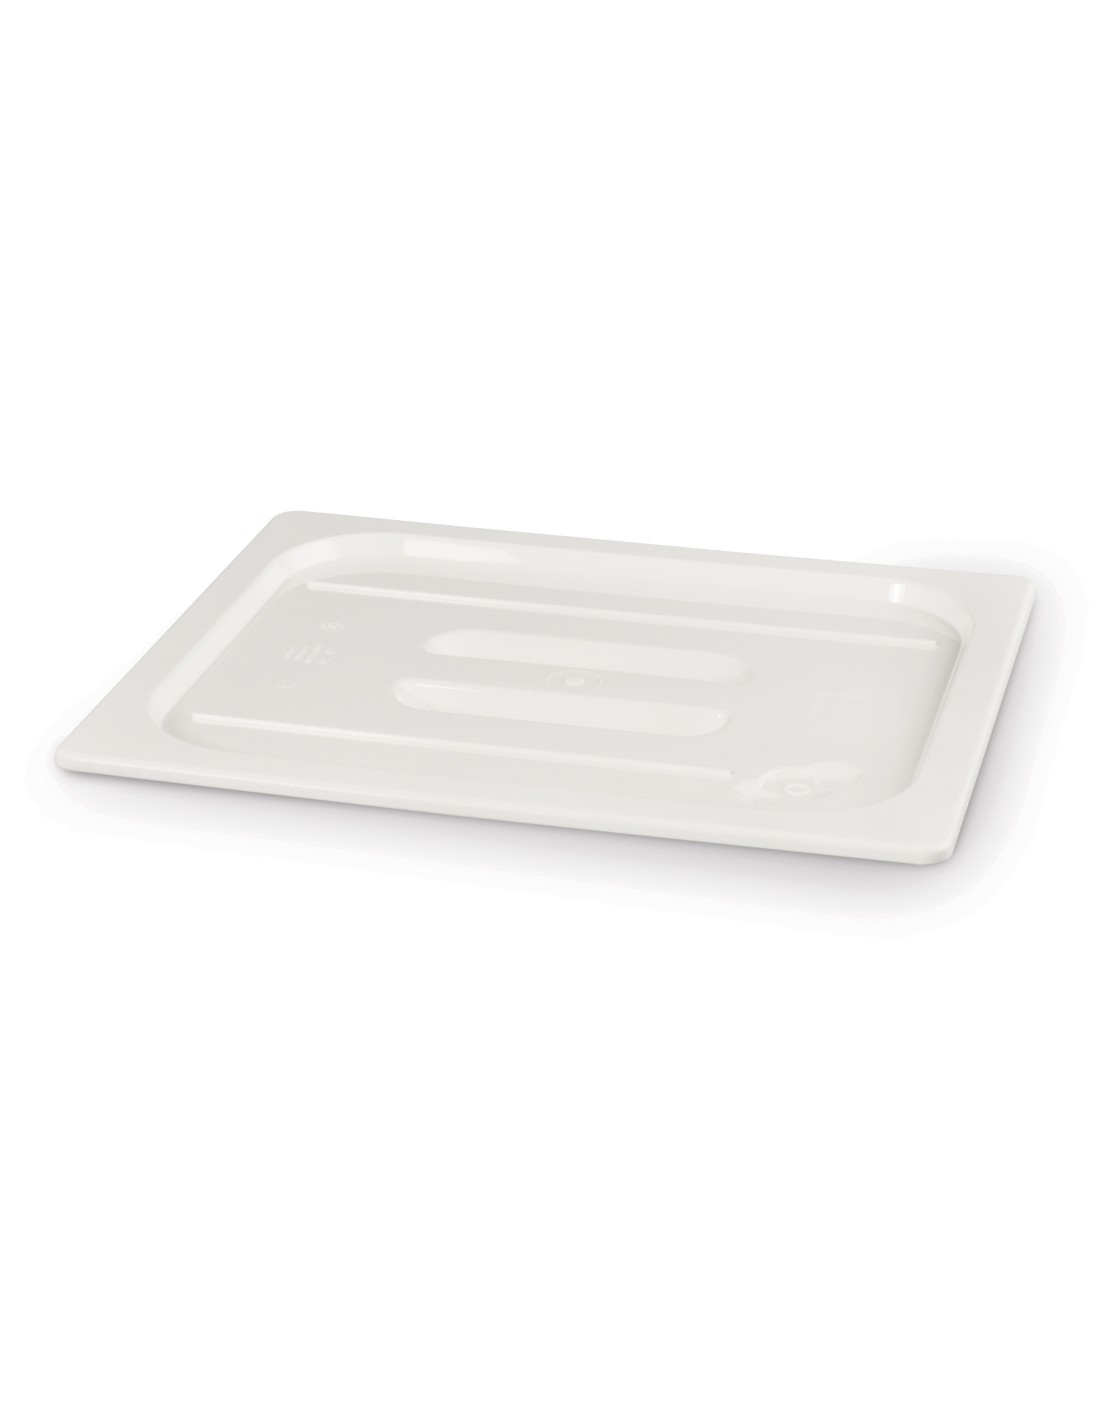 Lid for GN 1/3 trays - In white polycarbonate - mm 325 x 176